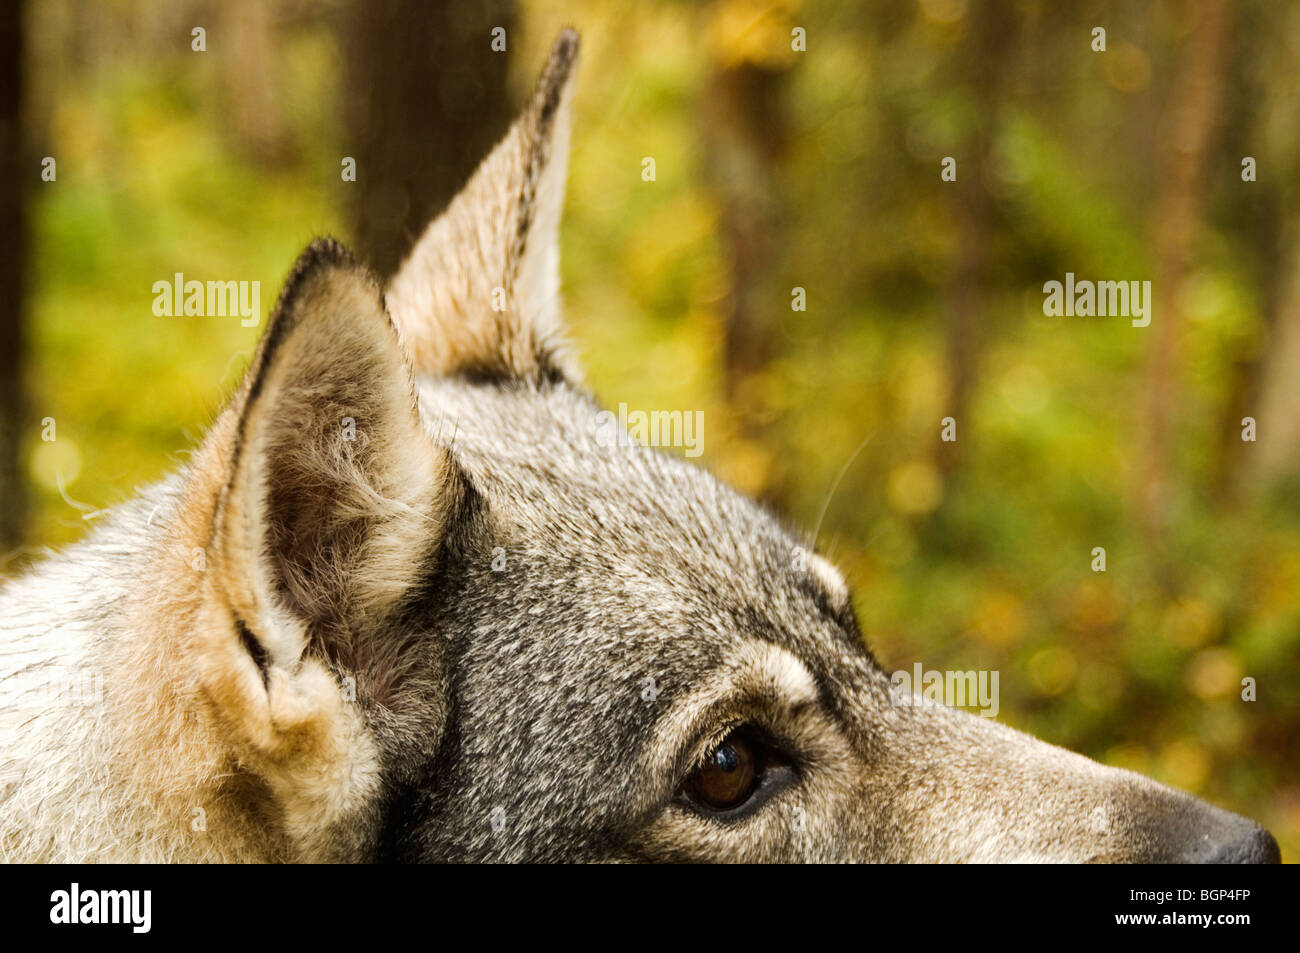 A Swedish Elkhound in the forest, Sweden. Stock Photo